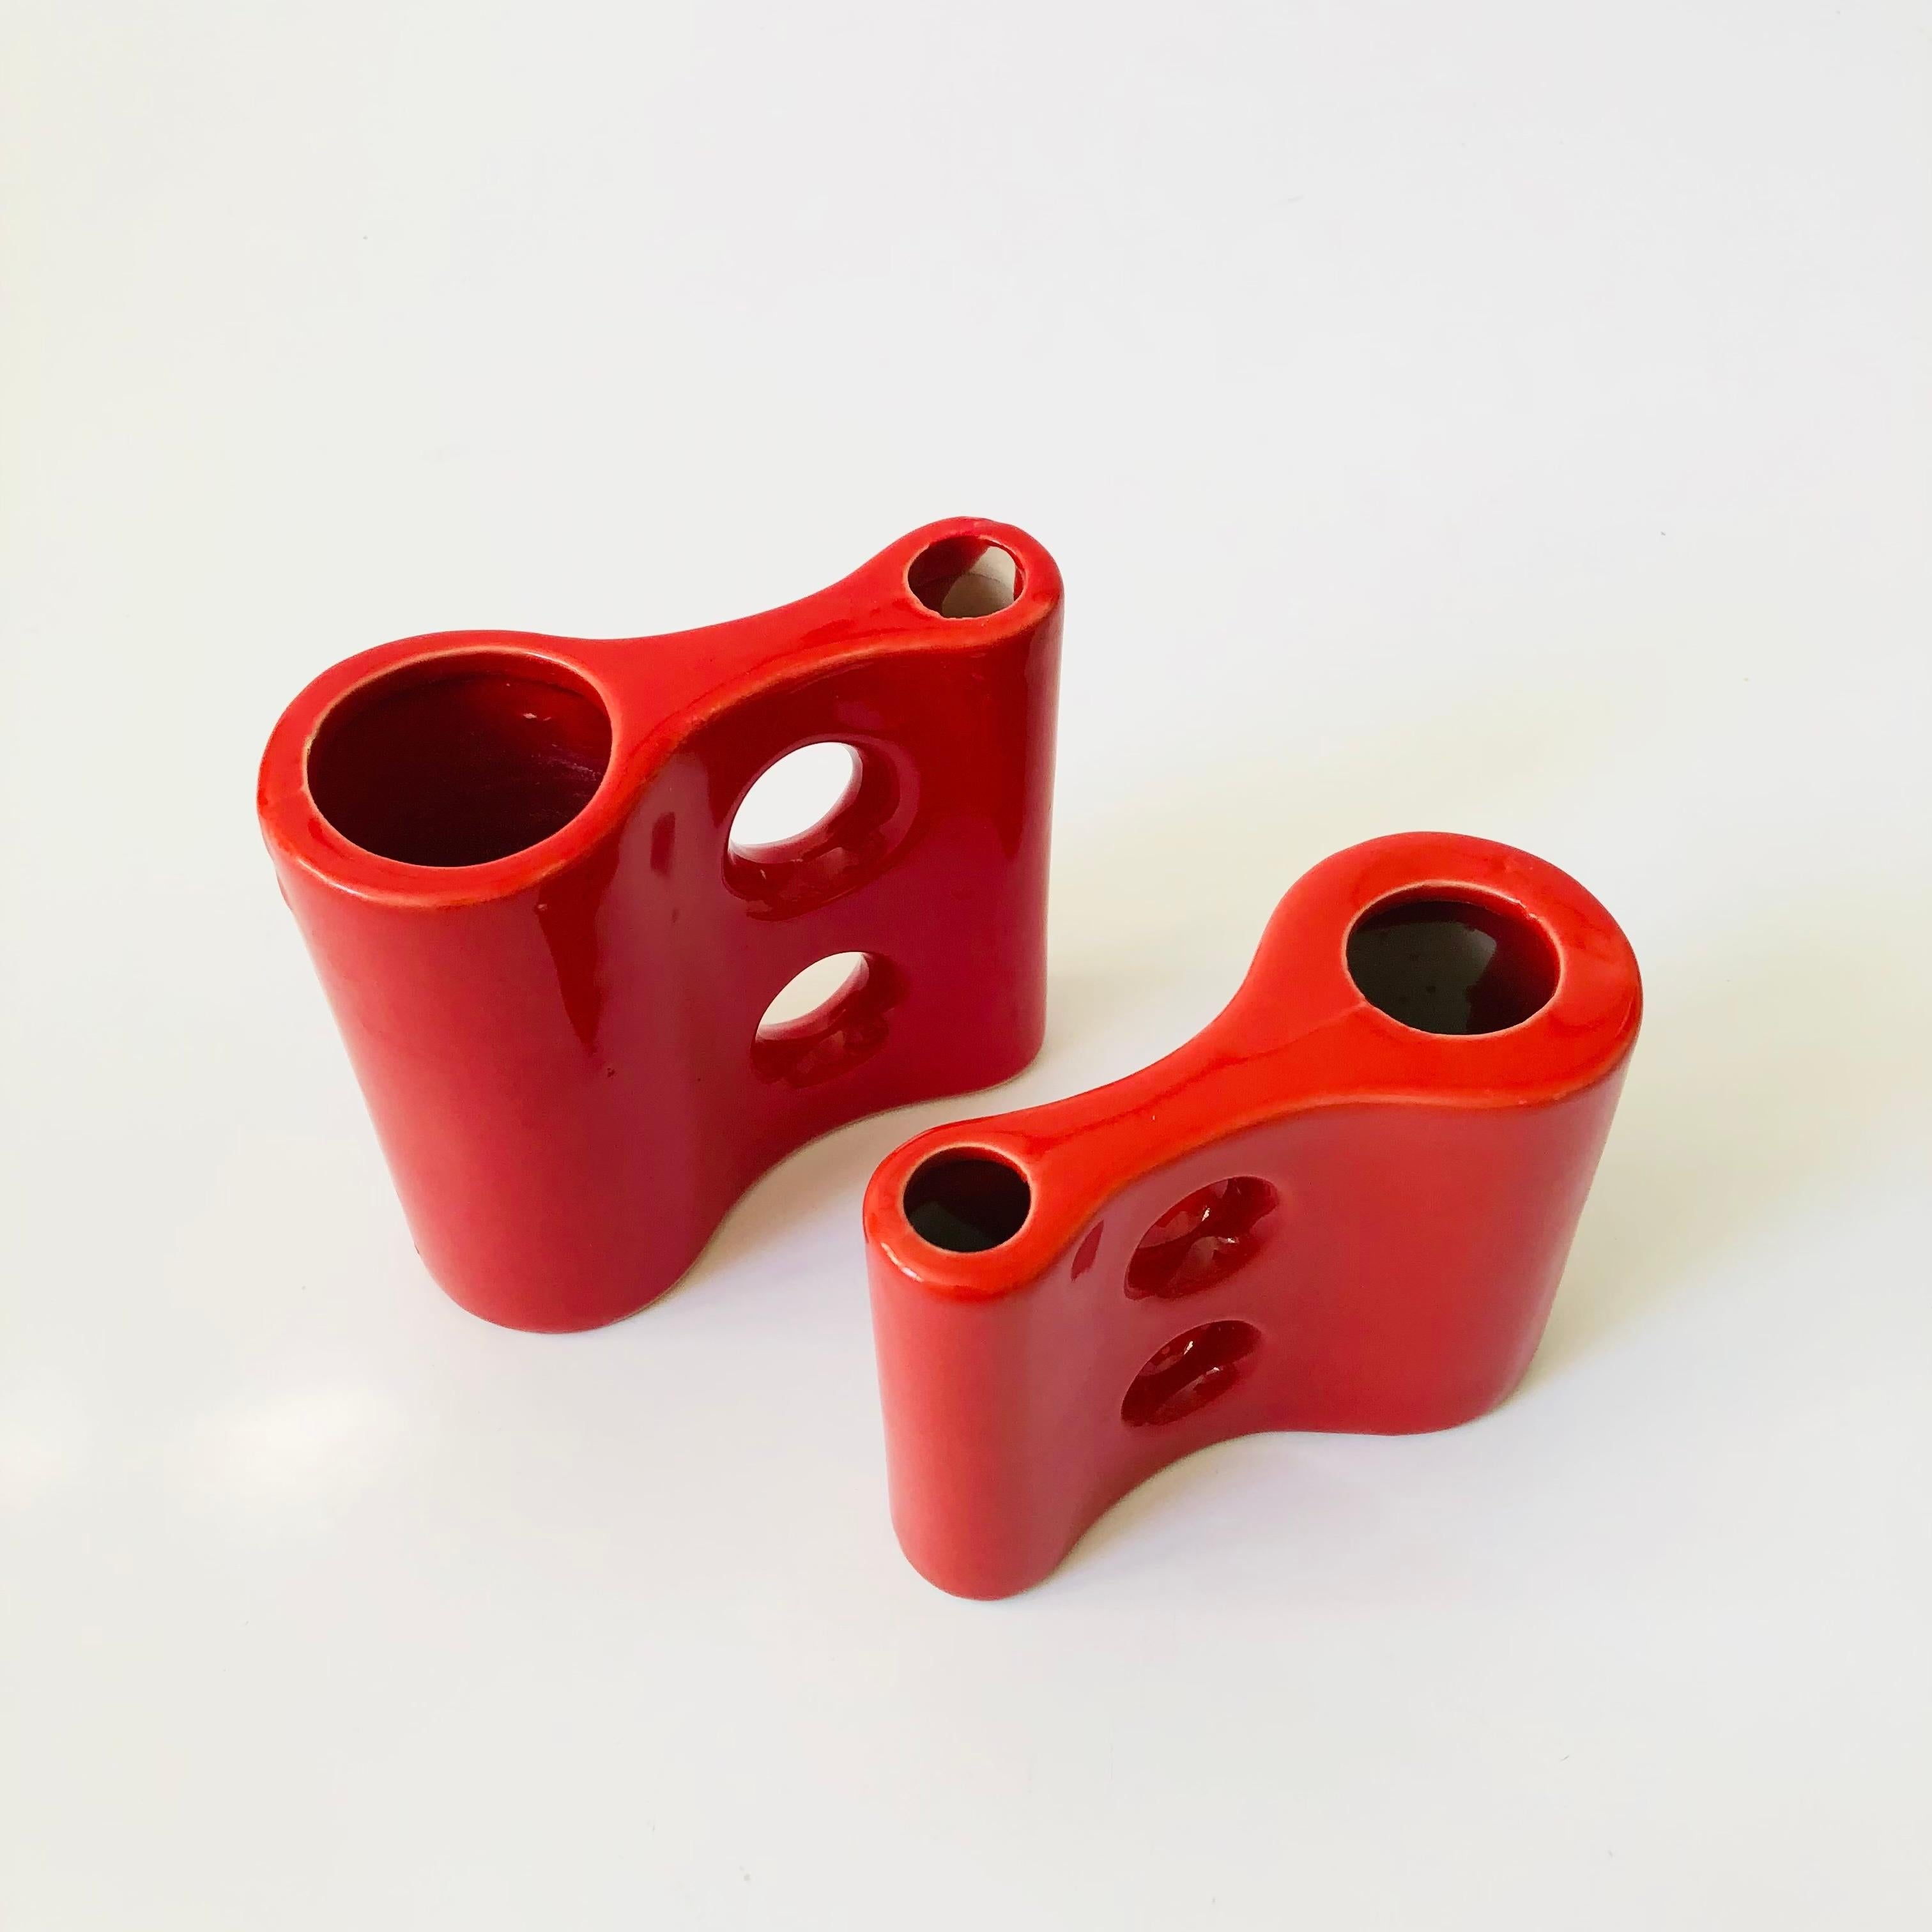 A pair of vintage sculptural ceramic vases in varying sizes. Unique shapes with holes on one side and two openings for holding flowers. Finished in a vibrant red glaze.
Measurements:
4.25